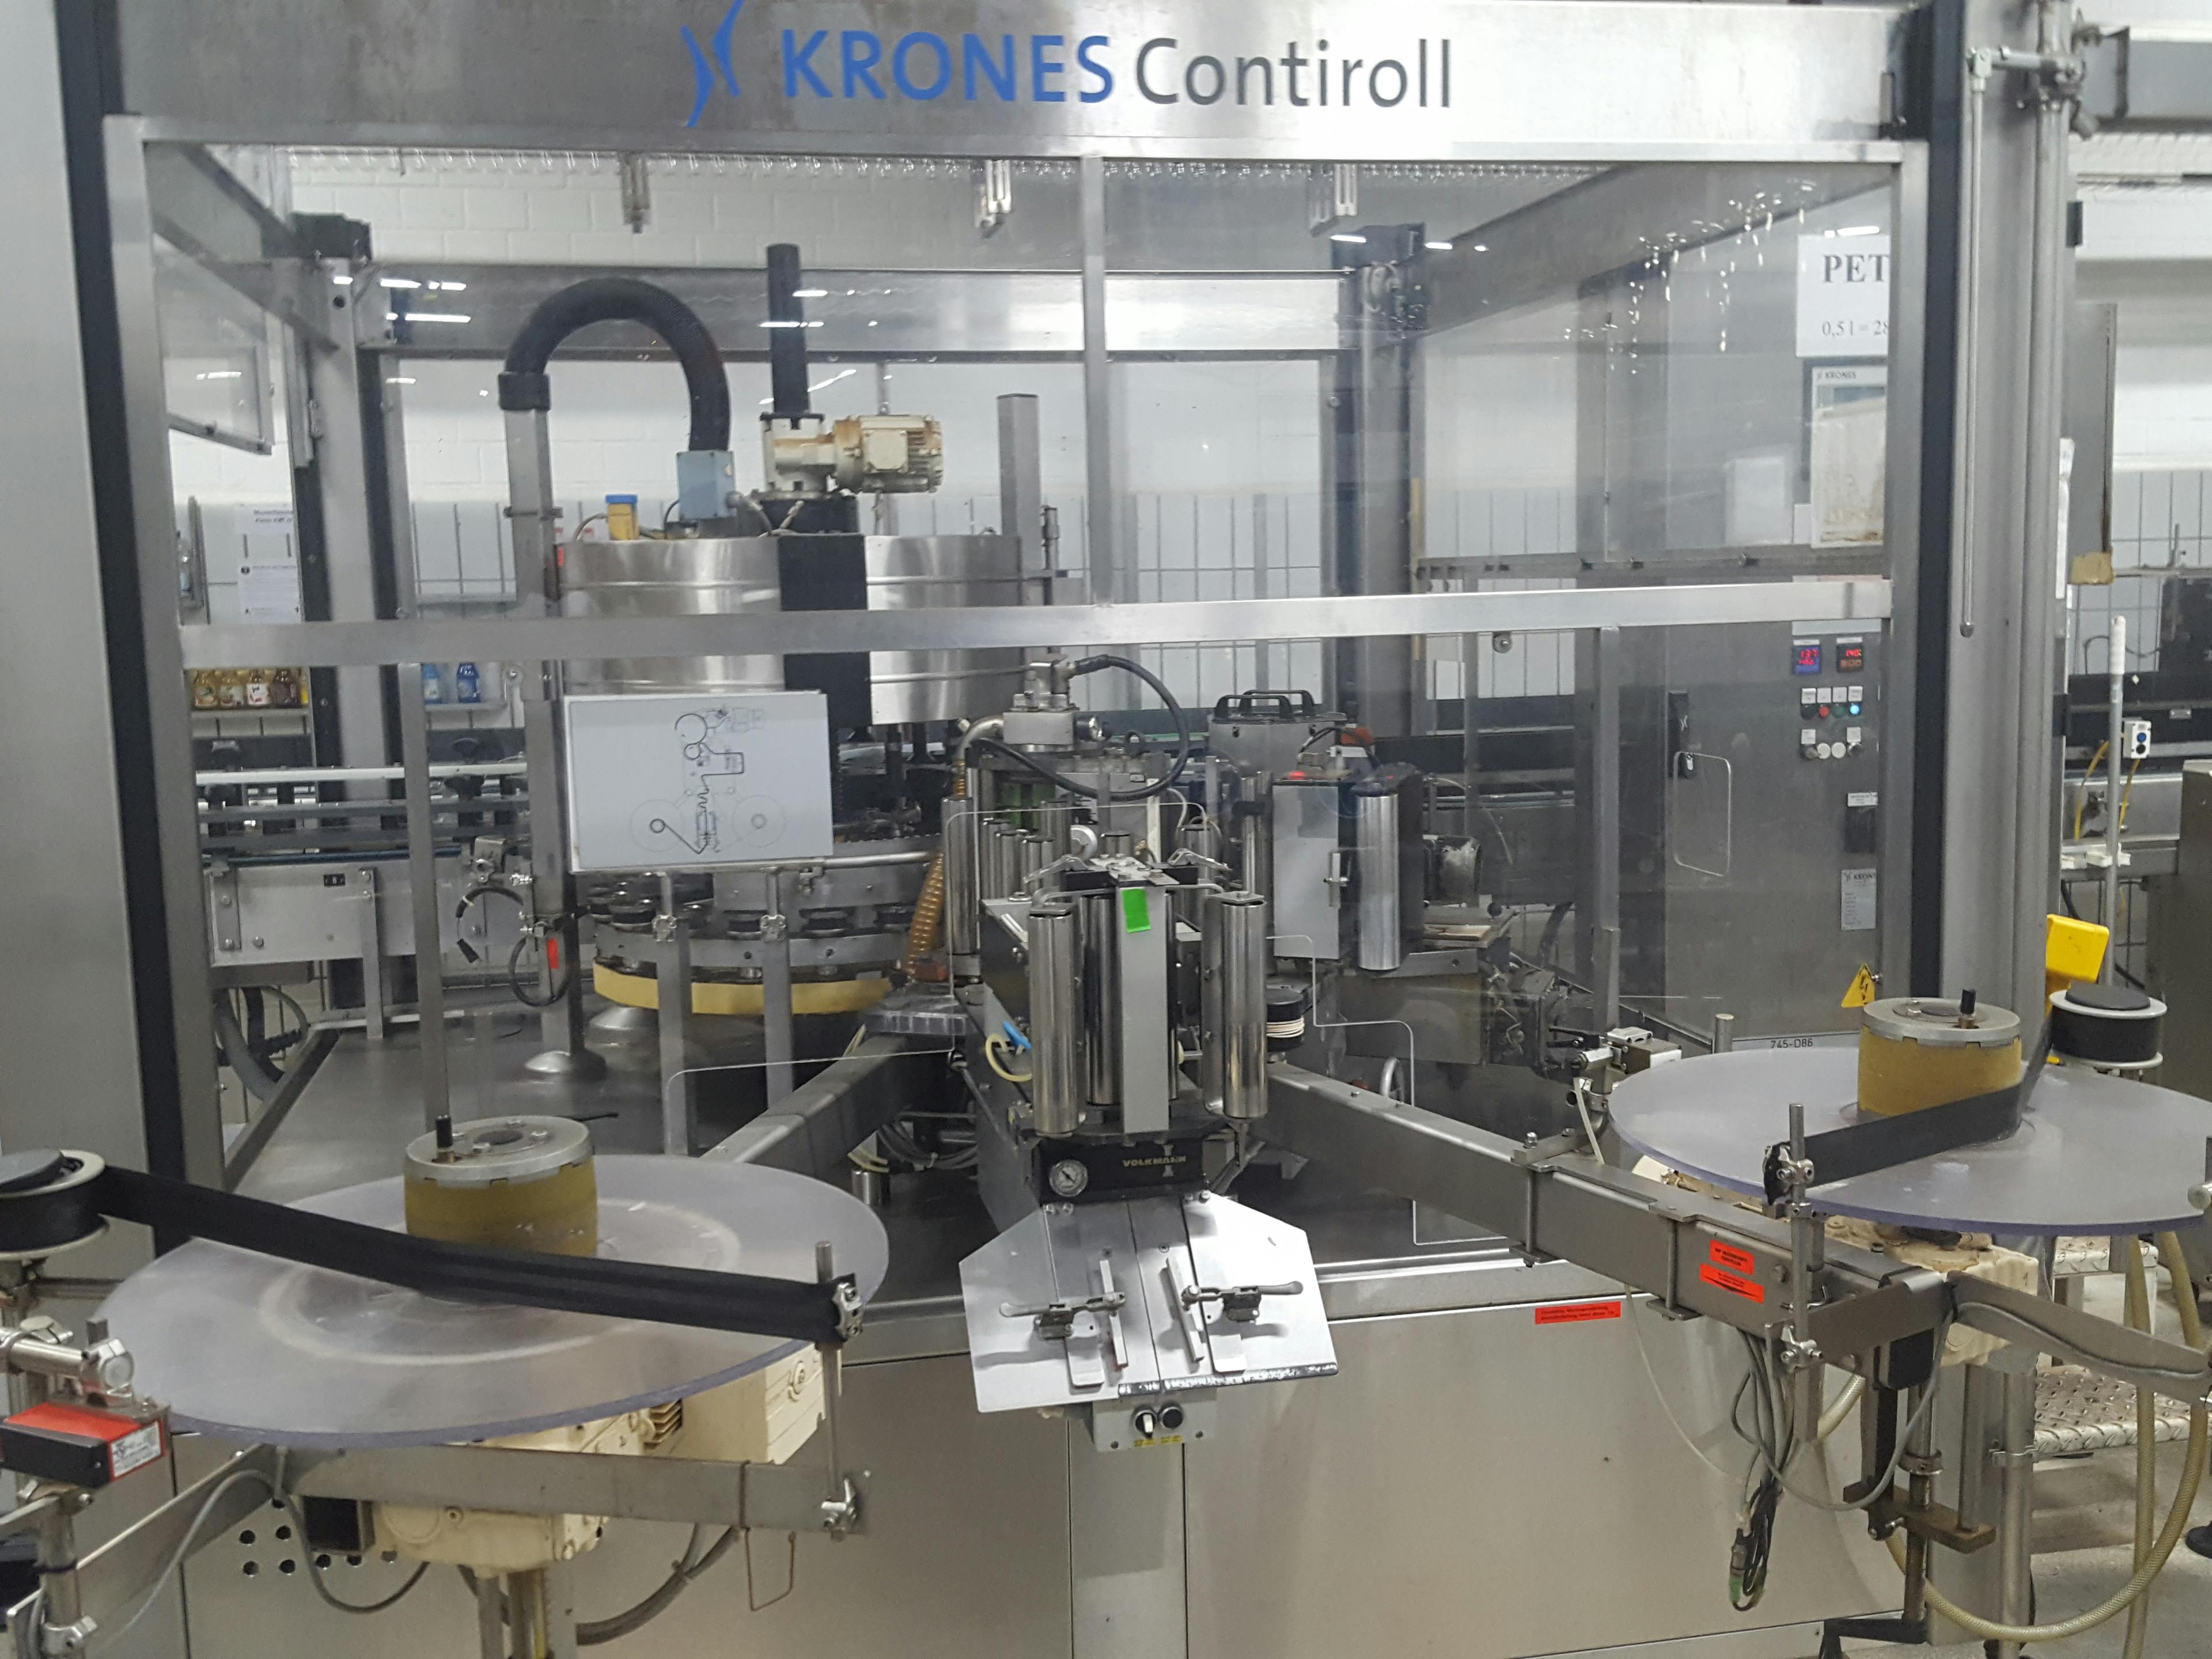 Front view of Krones Contiroll